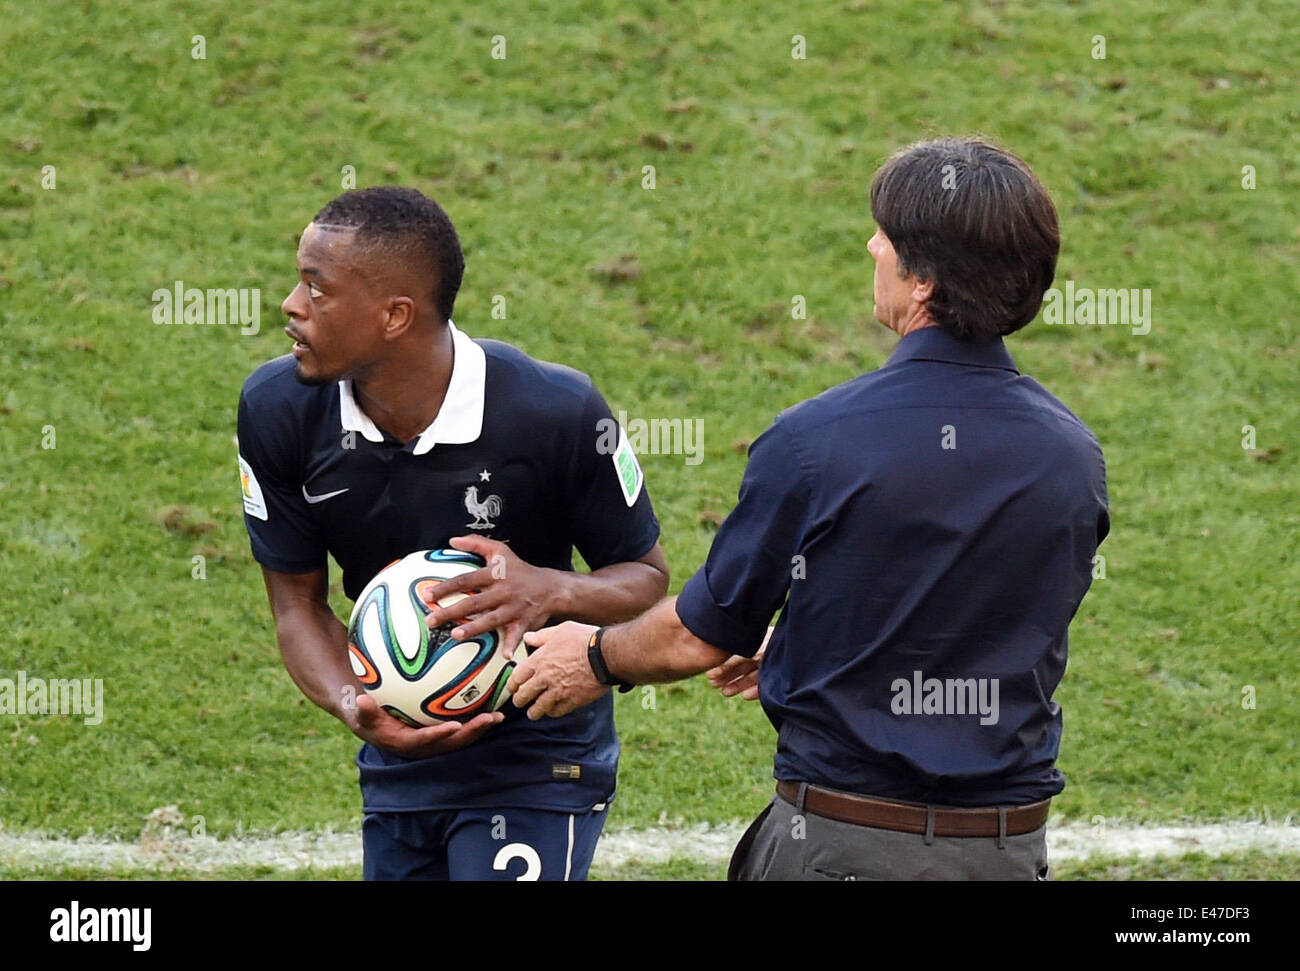 Rio de Janeiro, Brazil. 04th July, 2014. Patrice Evra (L) of France and head coach Joachim Loew of Germany seen during the FIFA World Cup 2014 quarter final soccer match between France and Germany at Estadio do Maracana in Rio de Janeiro, Brazil, 04 July 2014. Photo: Marcus Brandt/dpa/Alamy Live News Stock Photo